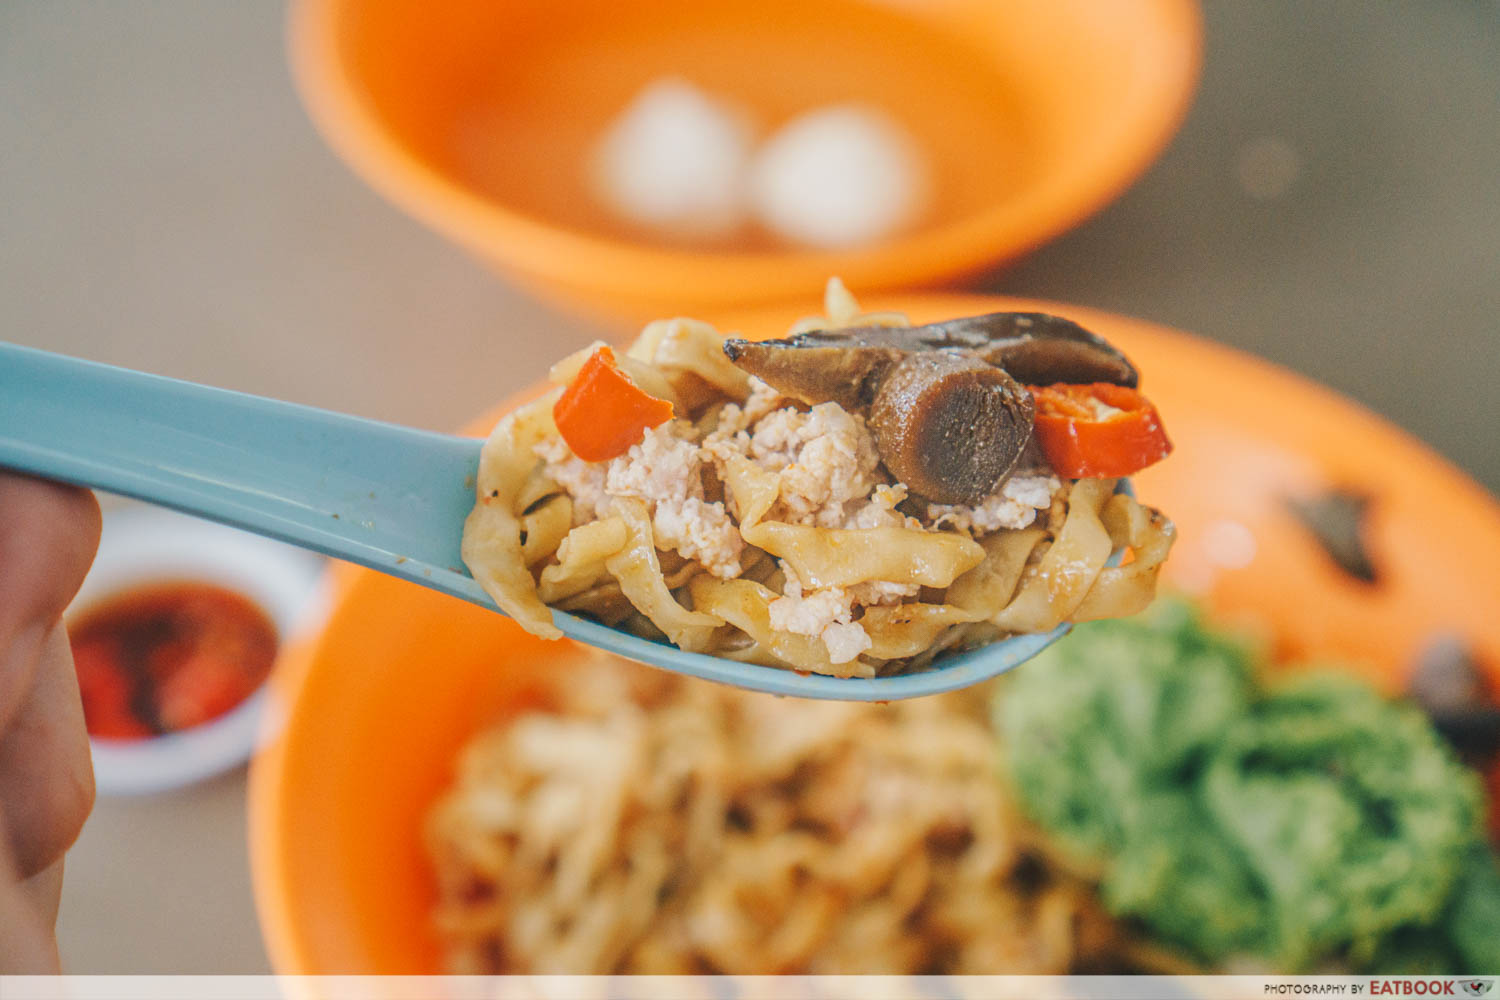 Yong Hua Delights - Spoonful of mushroom minced meat noodles